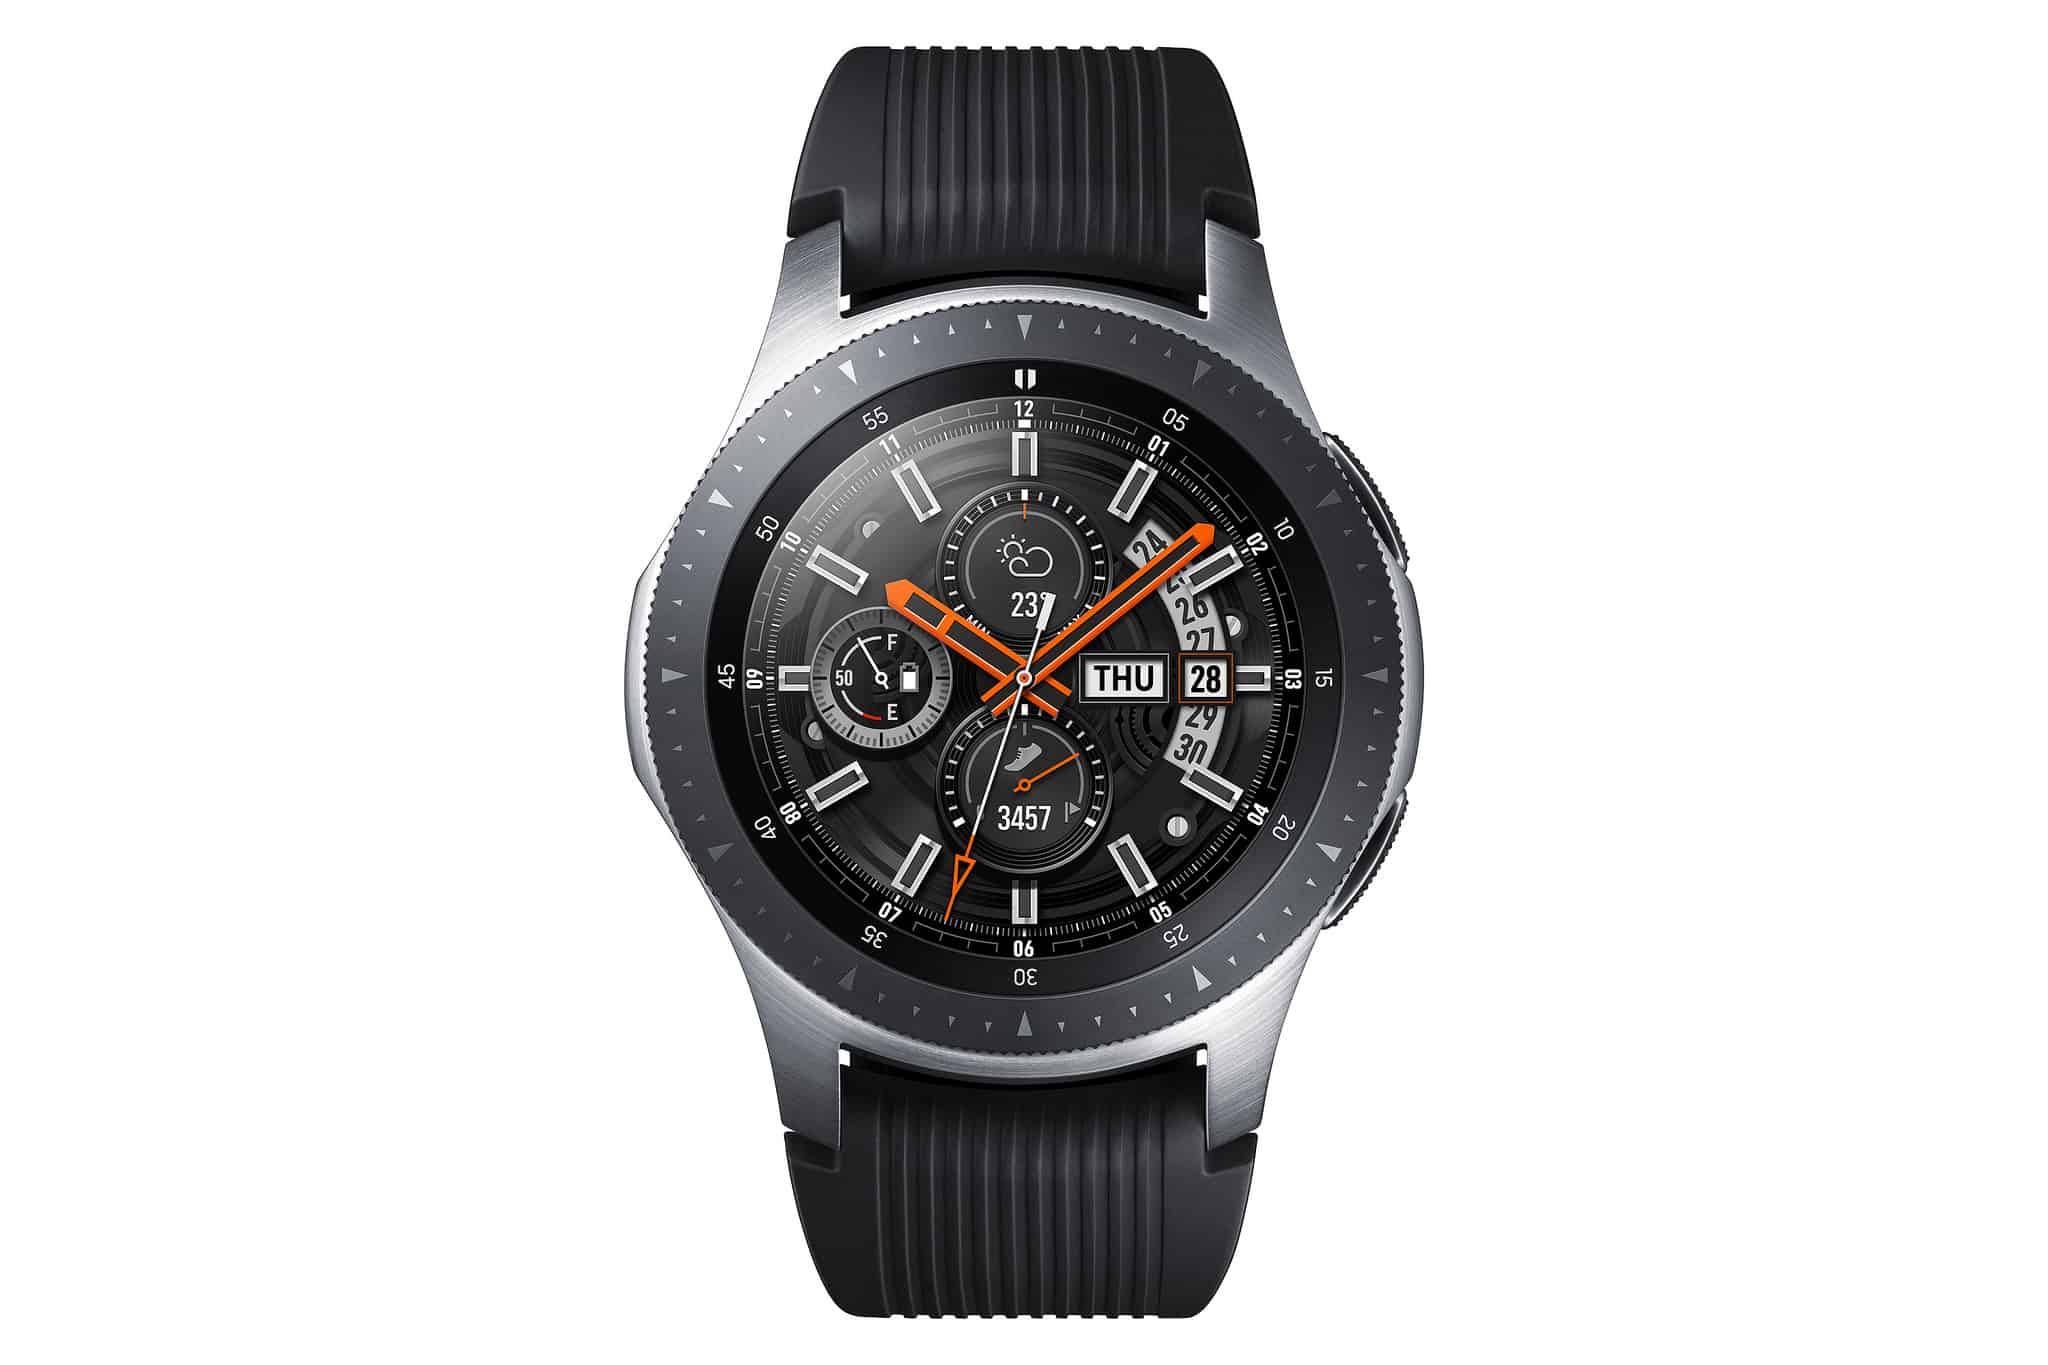 Samsung Launches the New Galaxy Watch in the Qatar